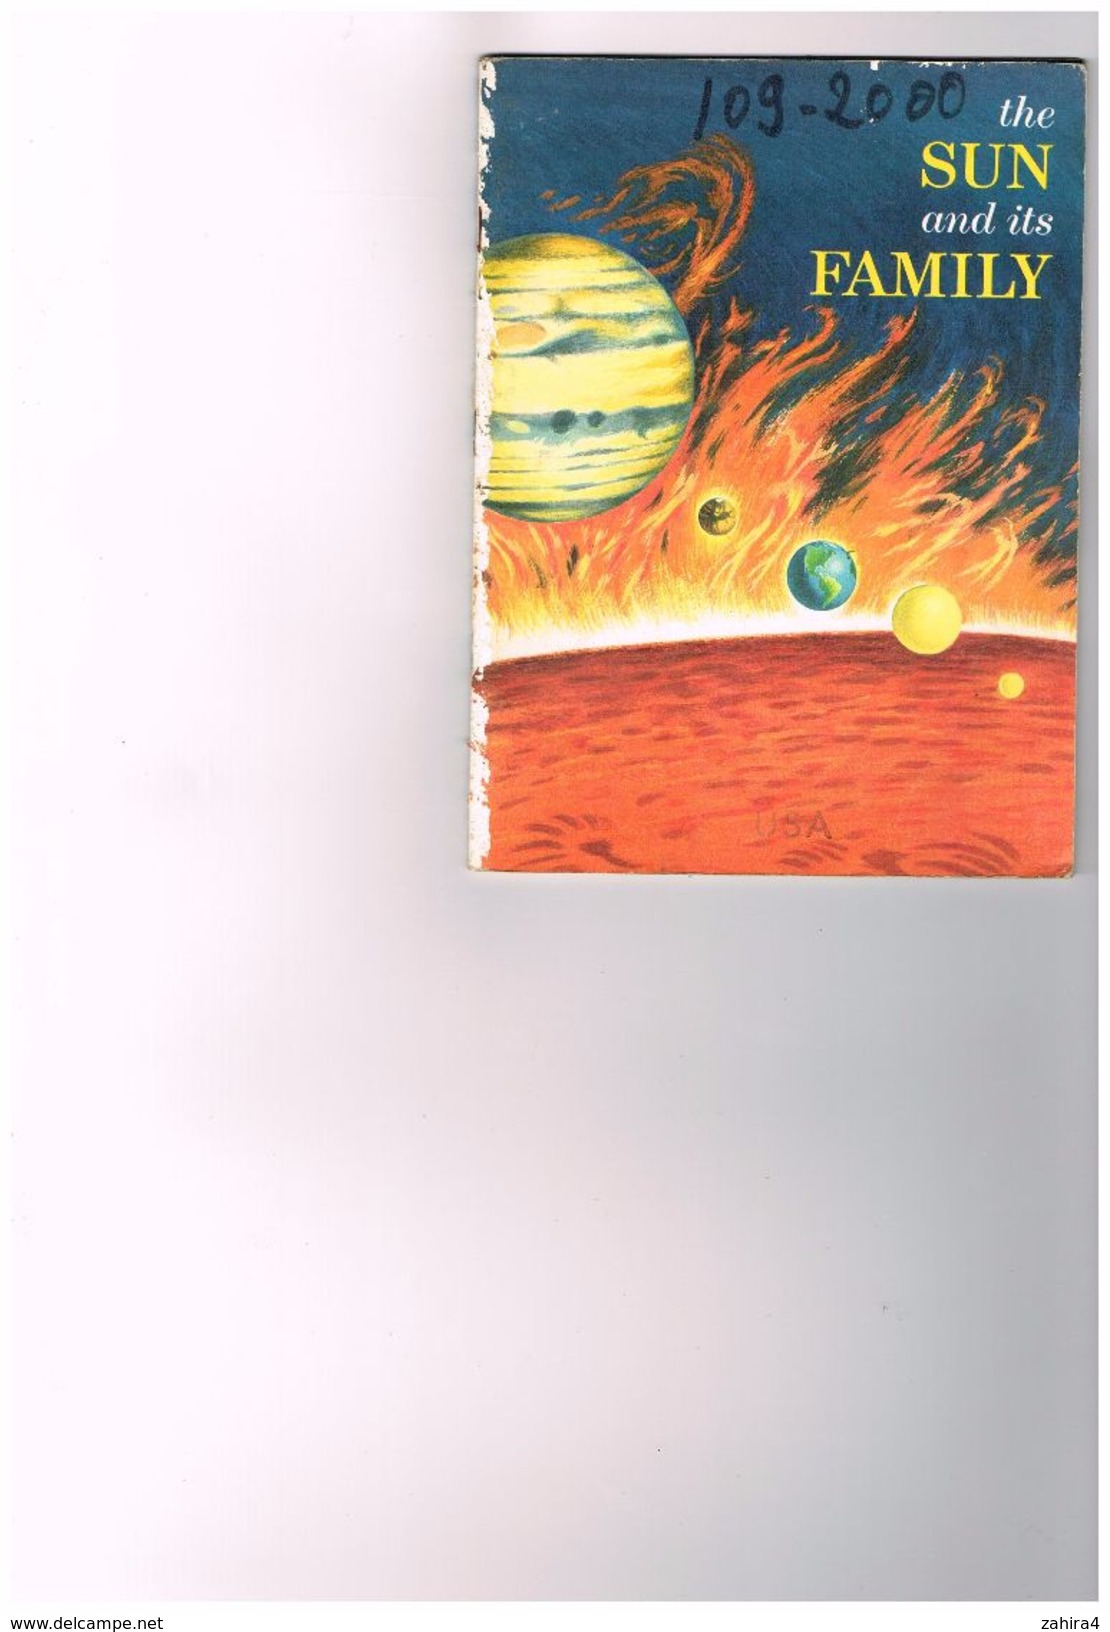 The Sun And Its Family USA The Basic Science éducation Serie Bertha Morris Parker - G. Van Biesbroeck Cover James Teason - Geography